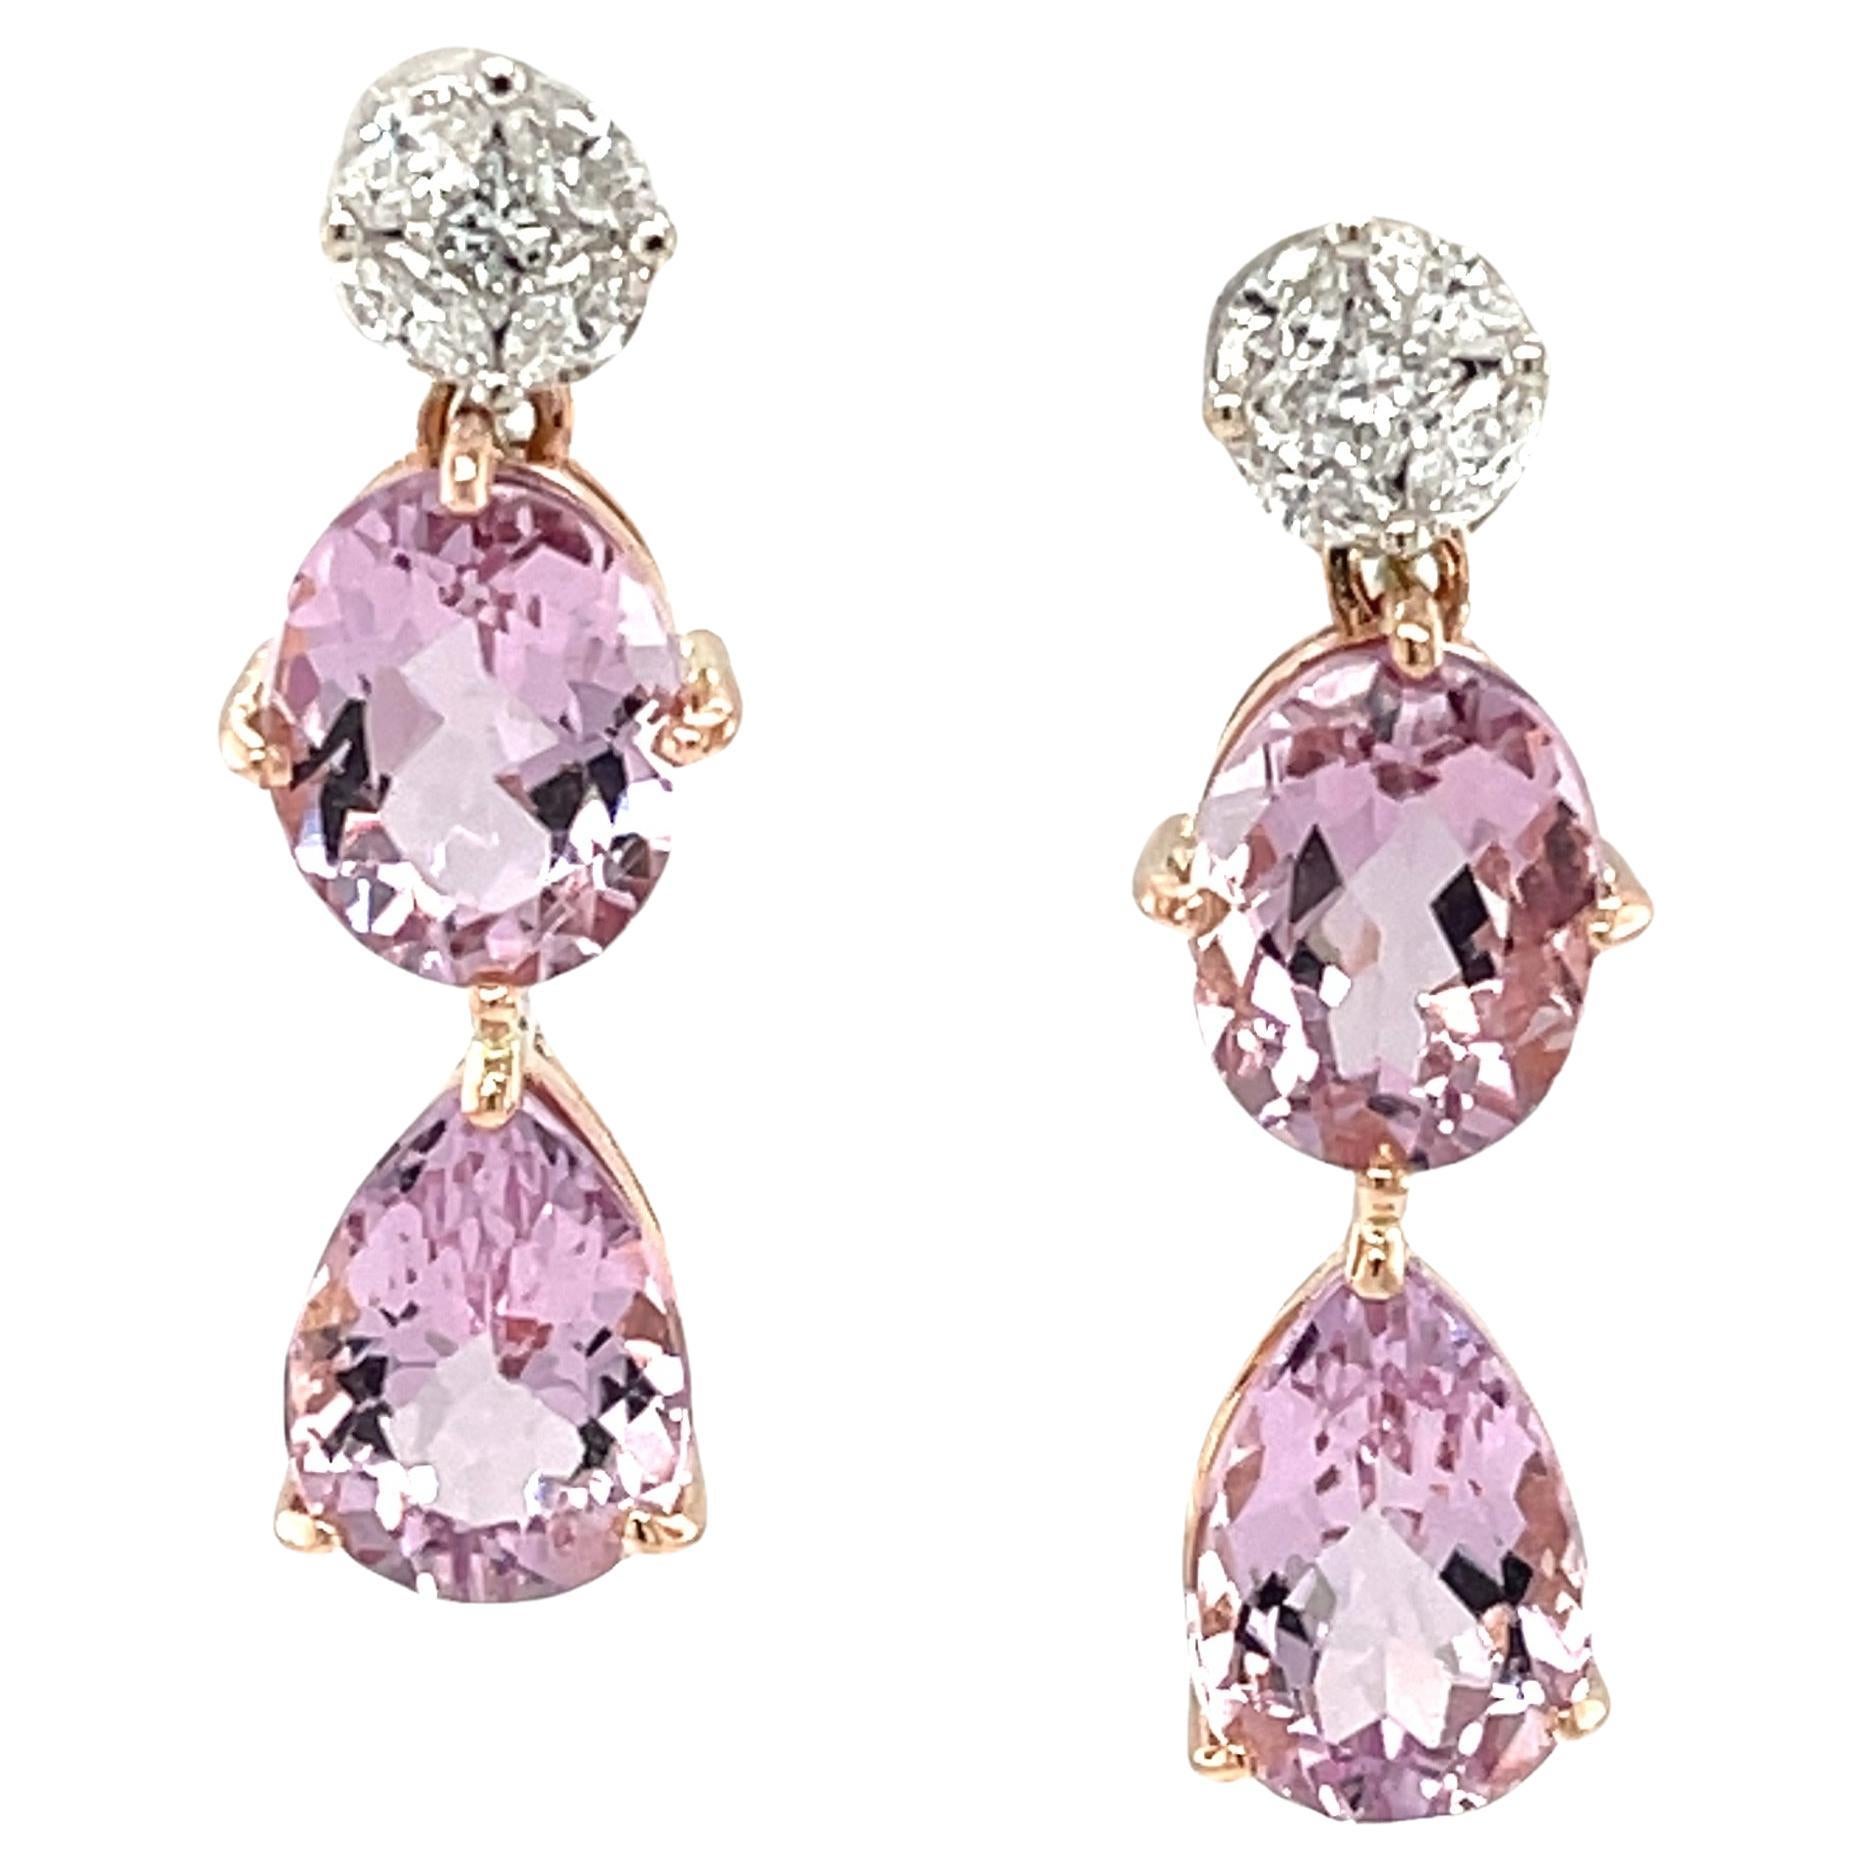  Morganite Drop Post Earrings with Diamond Tops in 18k Rose and White Gold